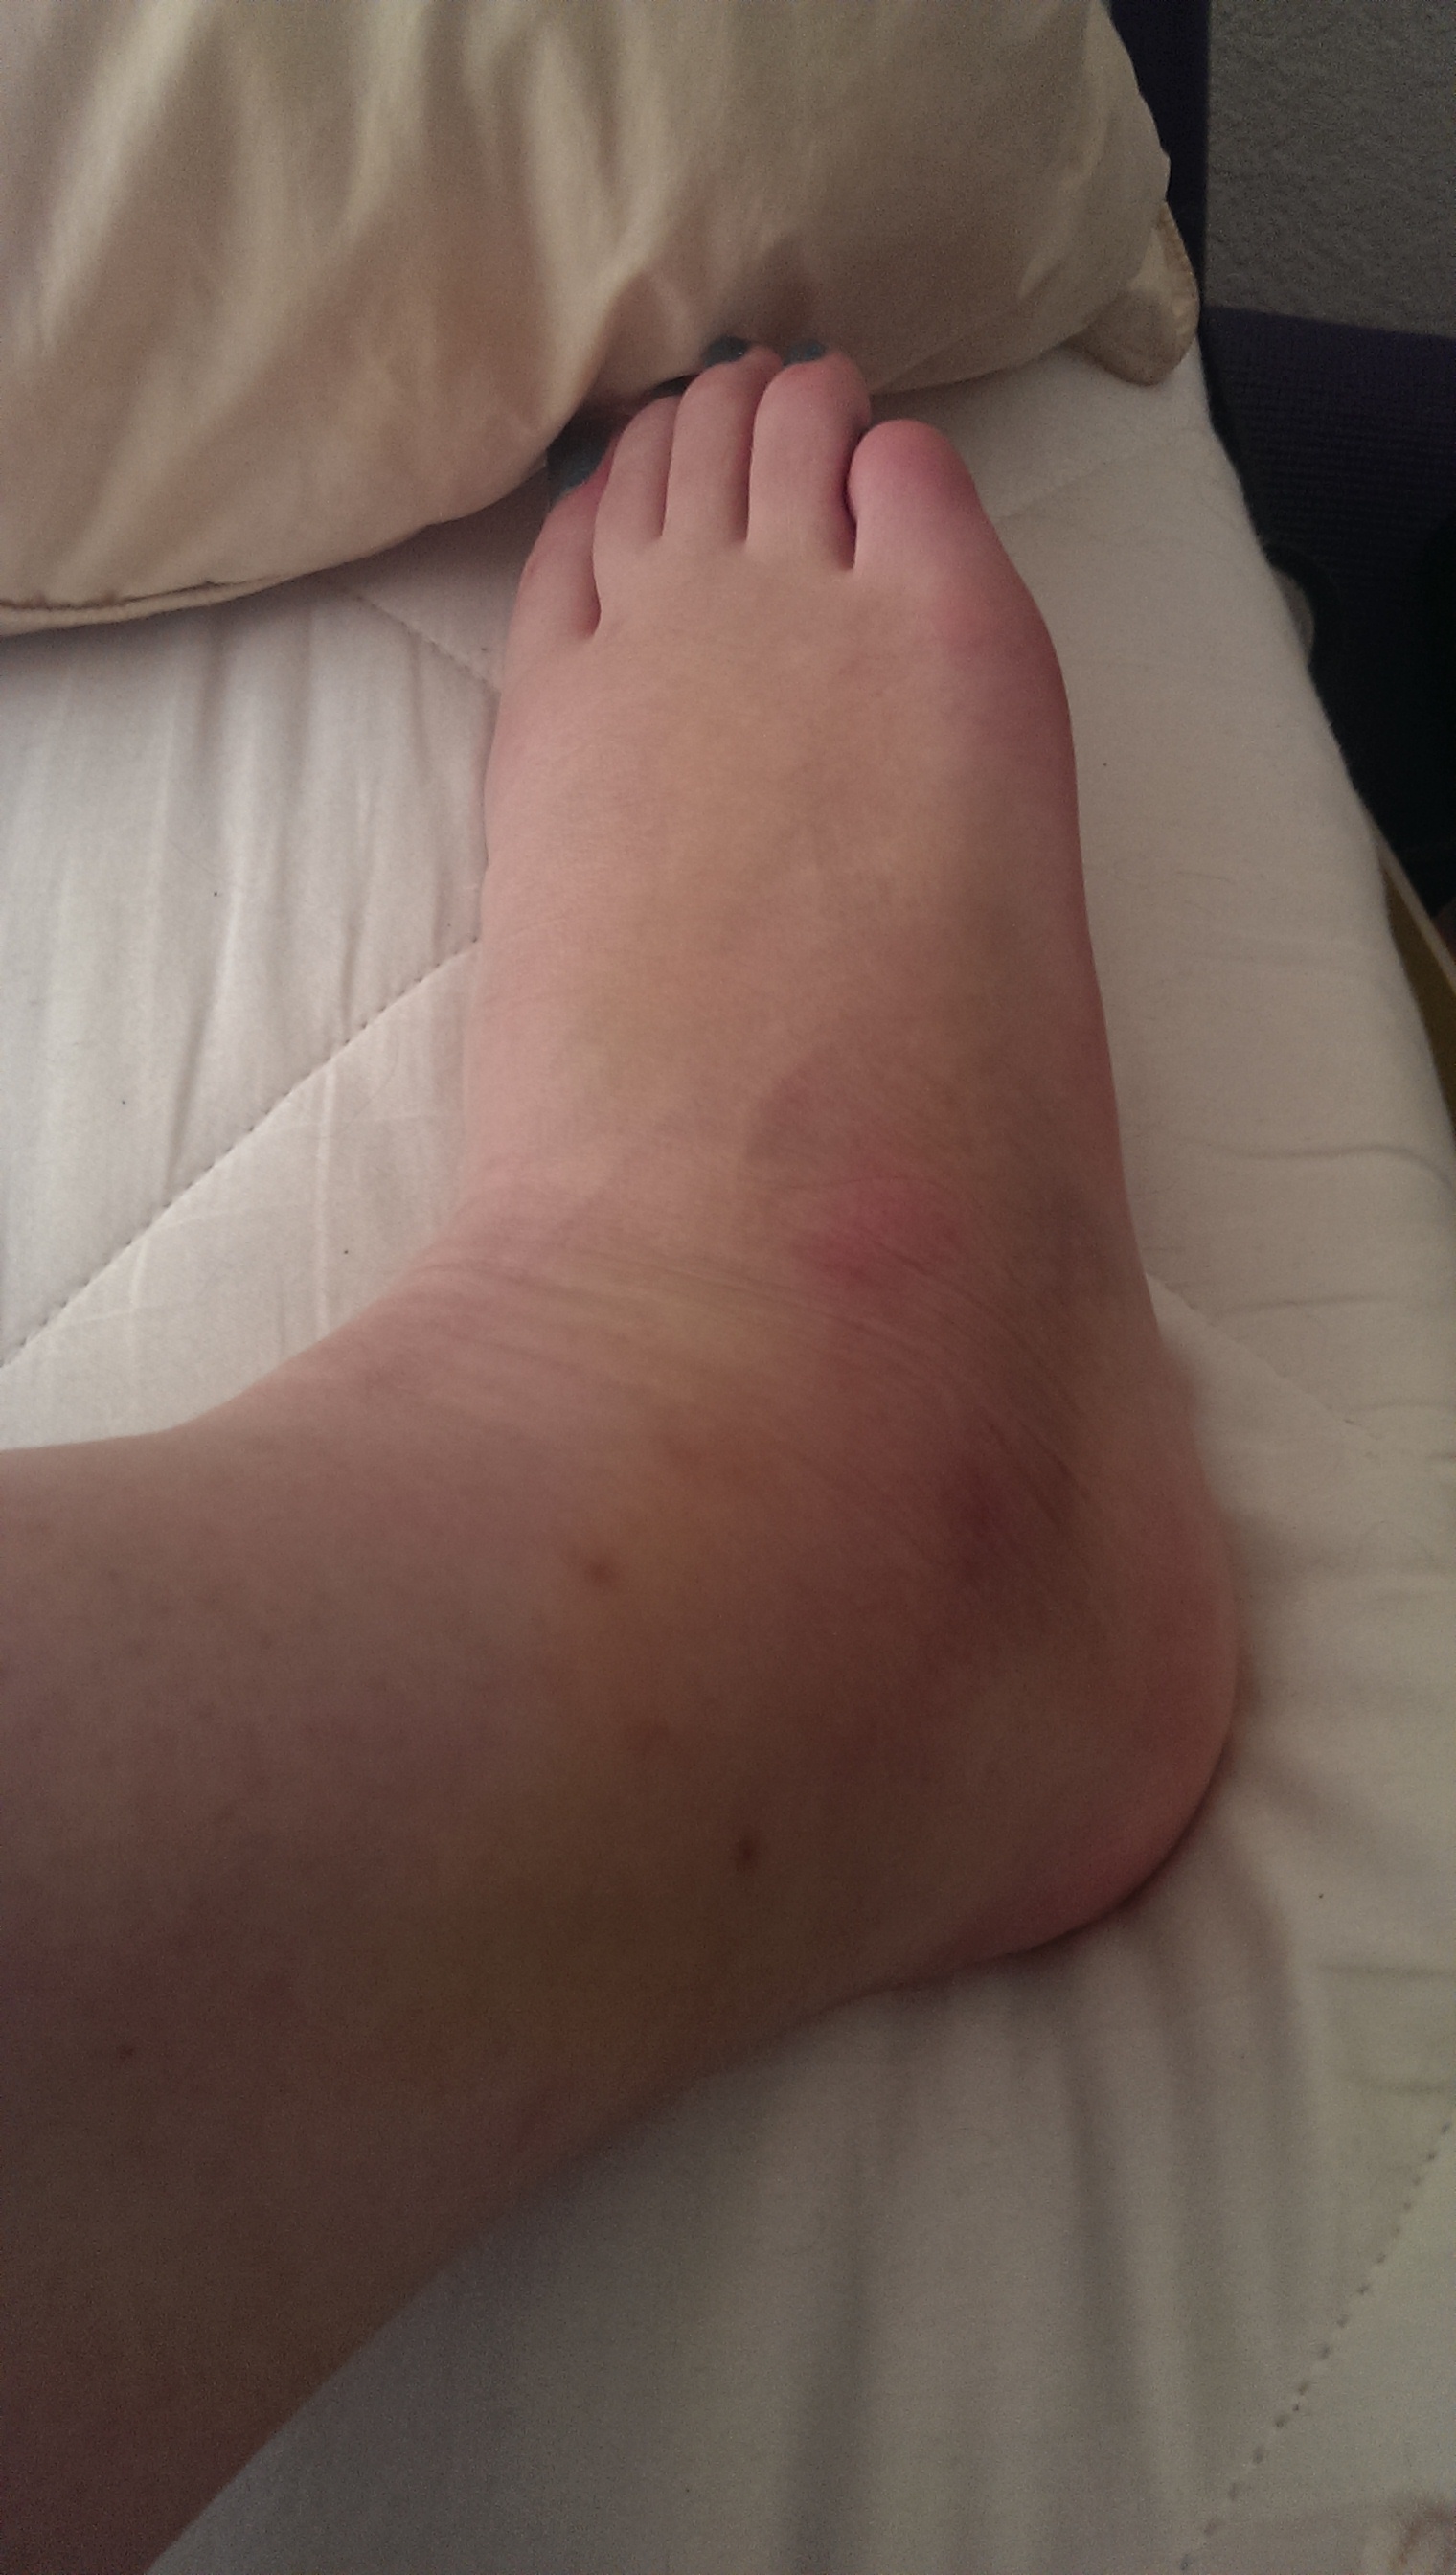 Cankle!